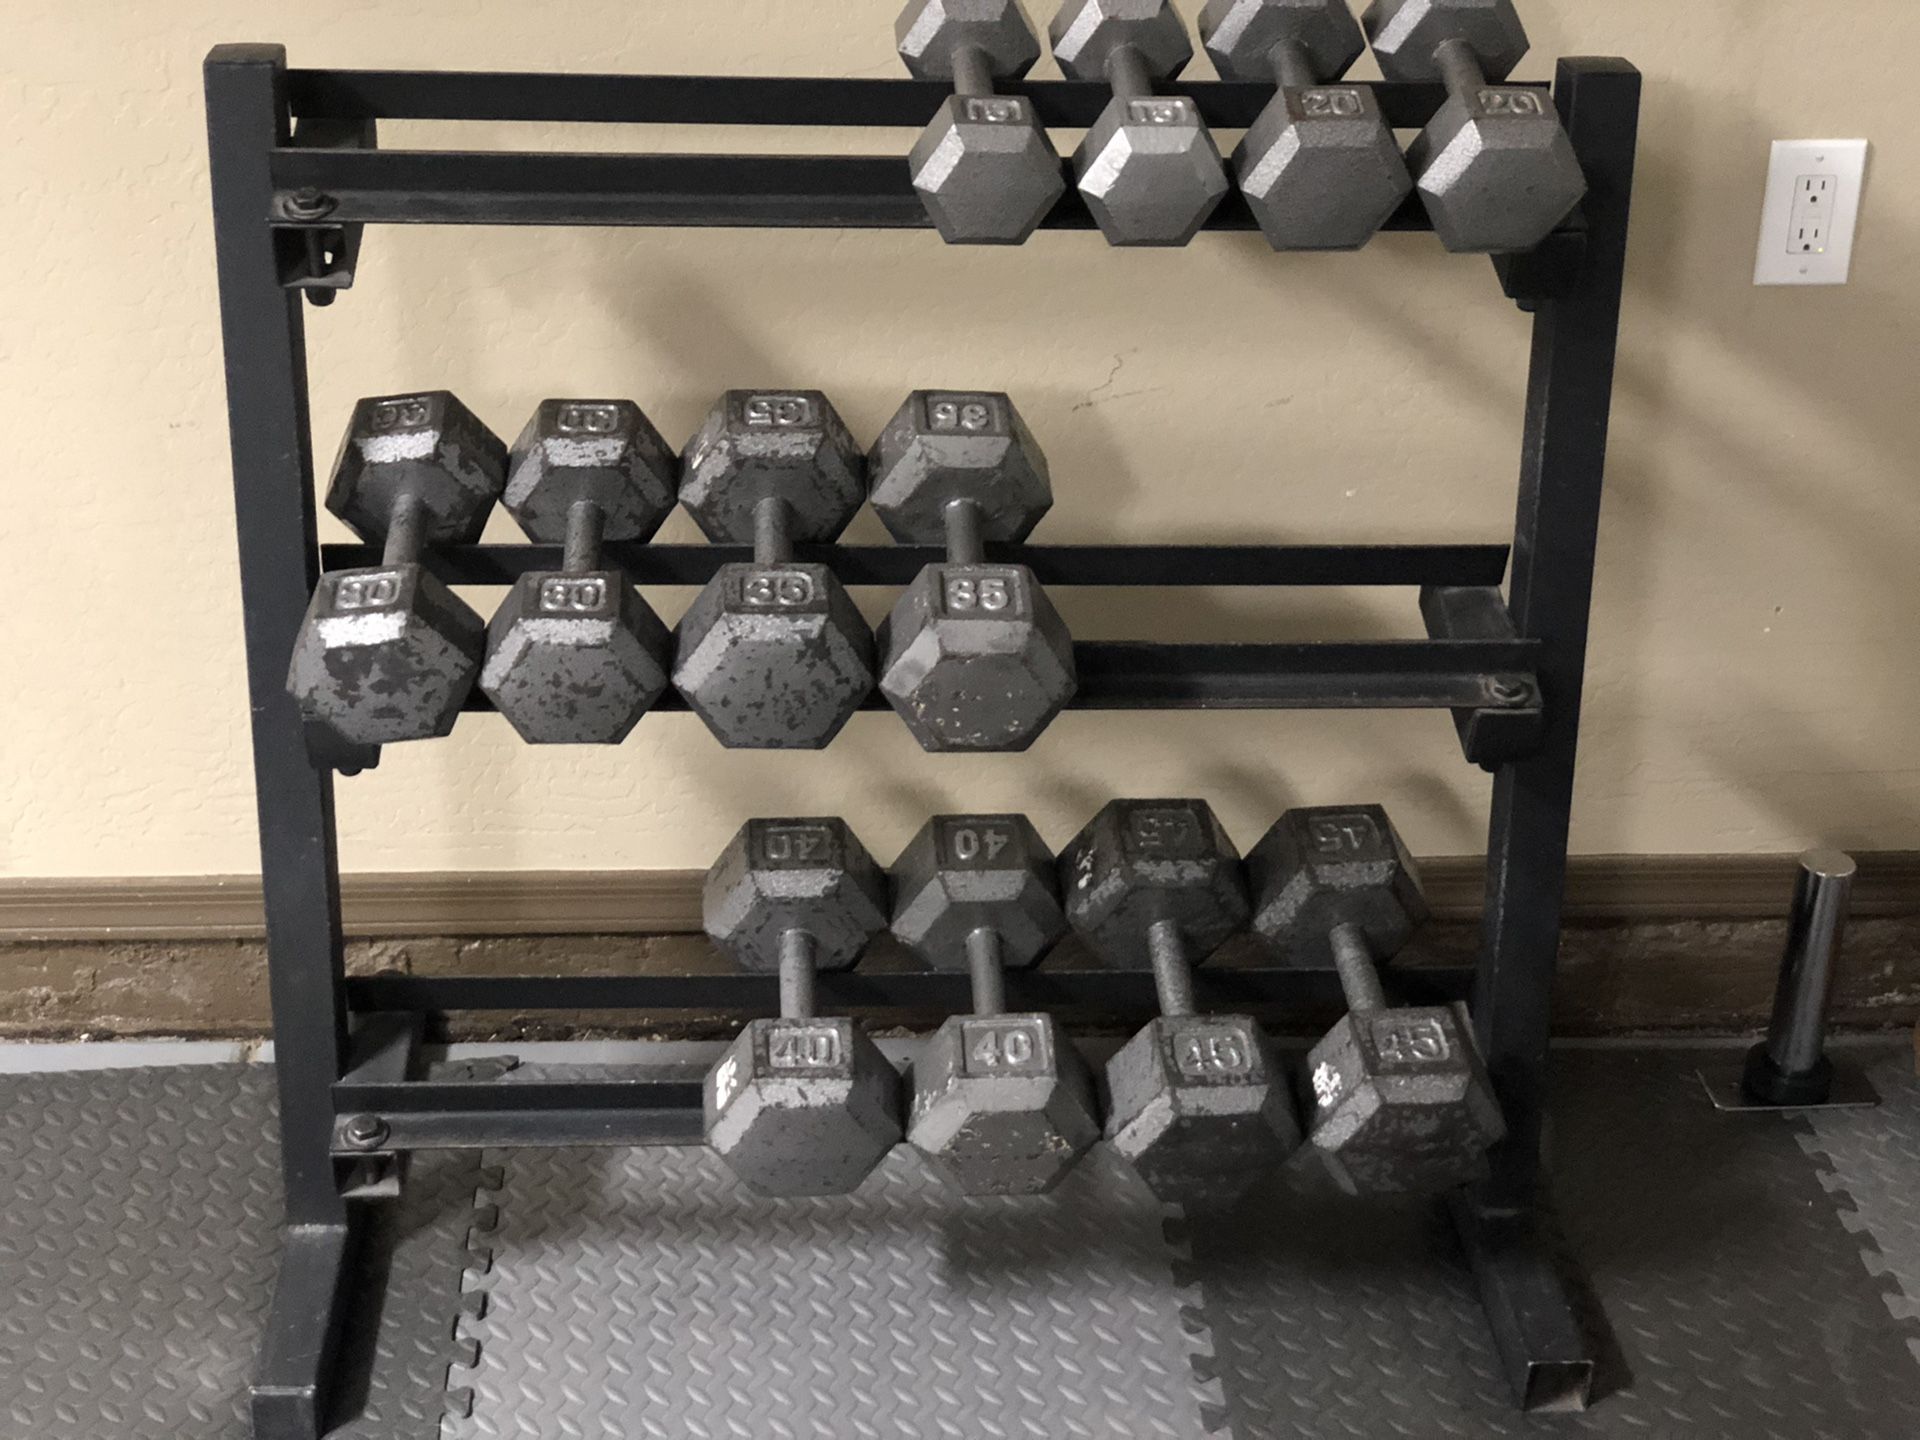 Weightlifting Dumbbells